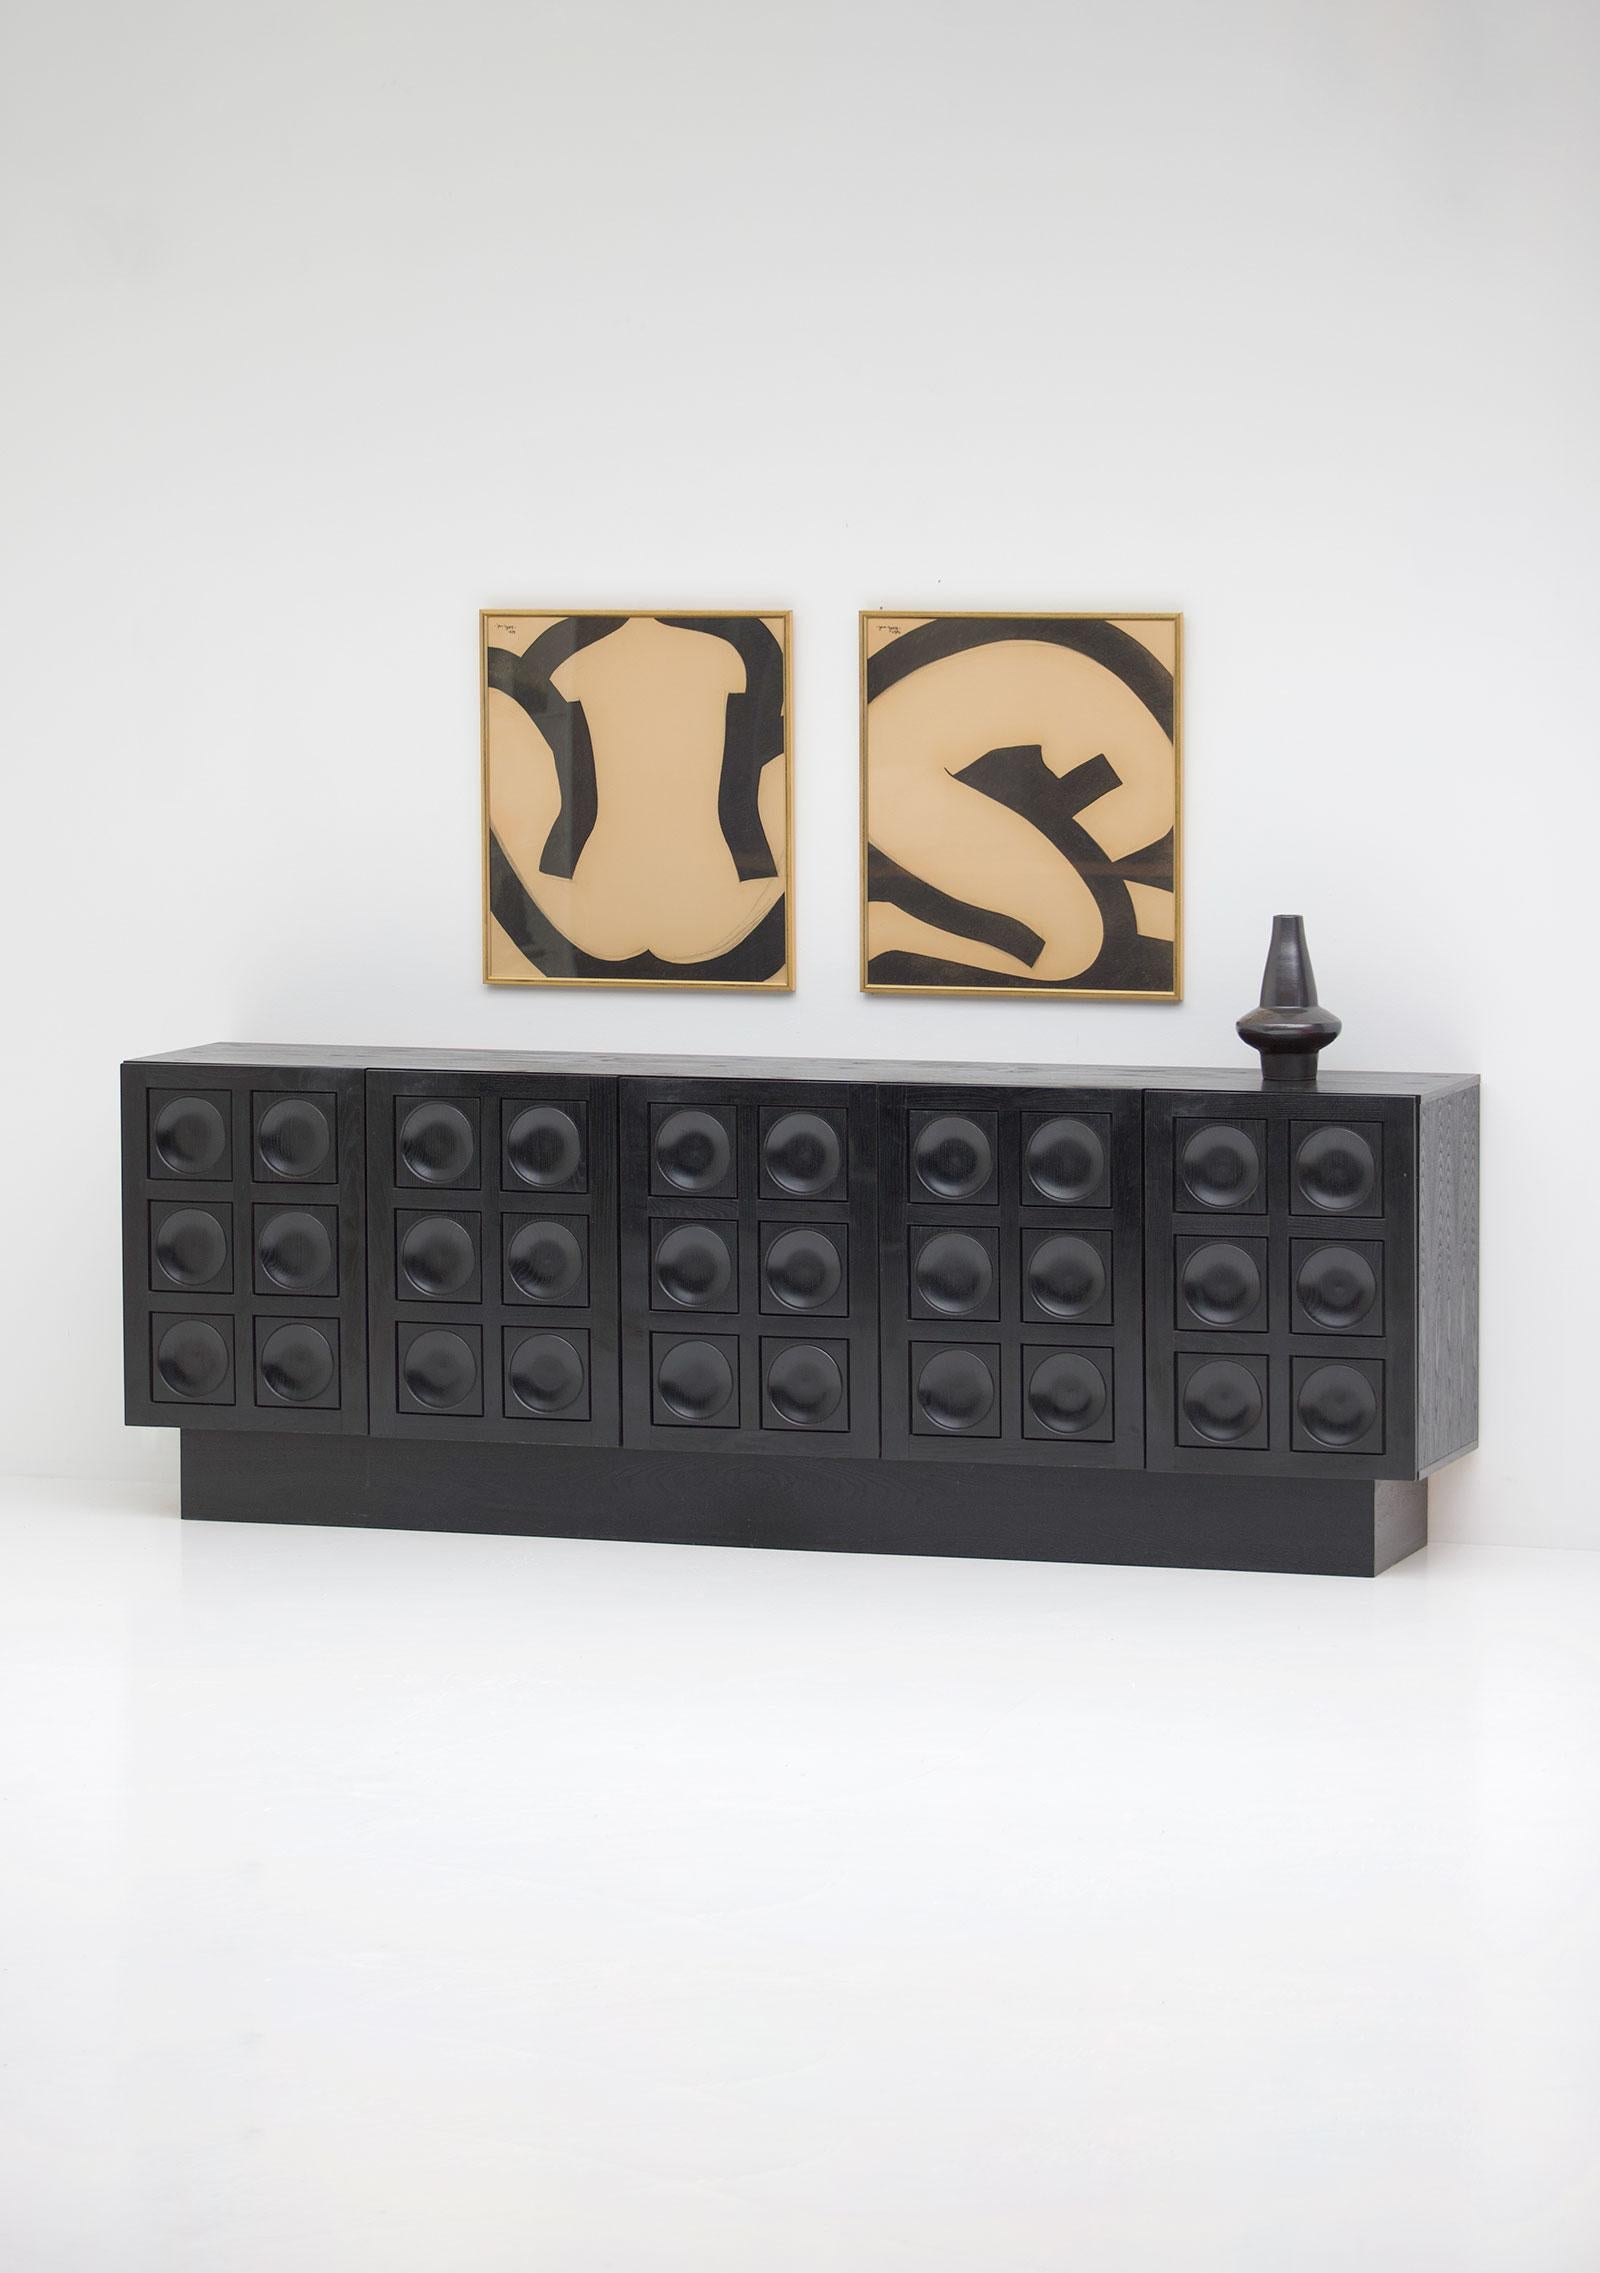 Black Brutalist sideboard from the 1970s.
The credenza shows a beautiful graphical front which is nicely detailed and decorated with circles. Plenty of storage space can be found behind all five doors. Behind the middle door, four drawers are